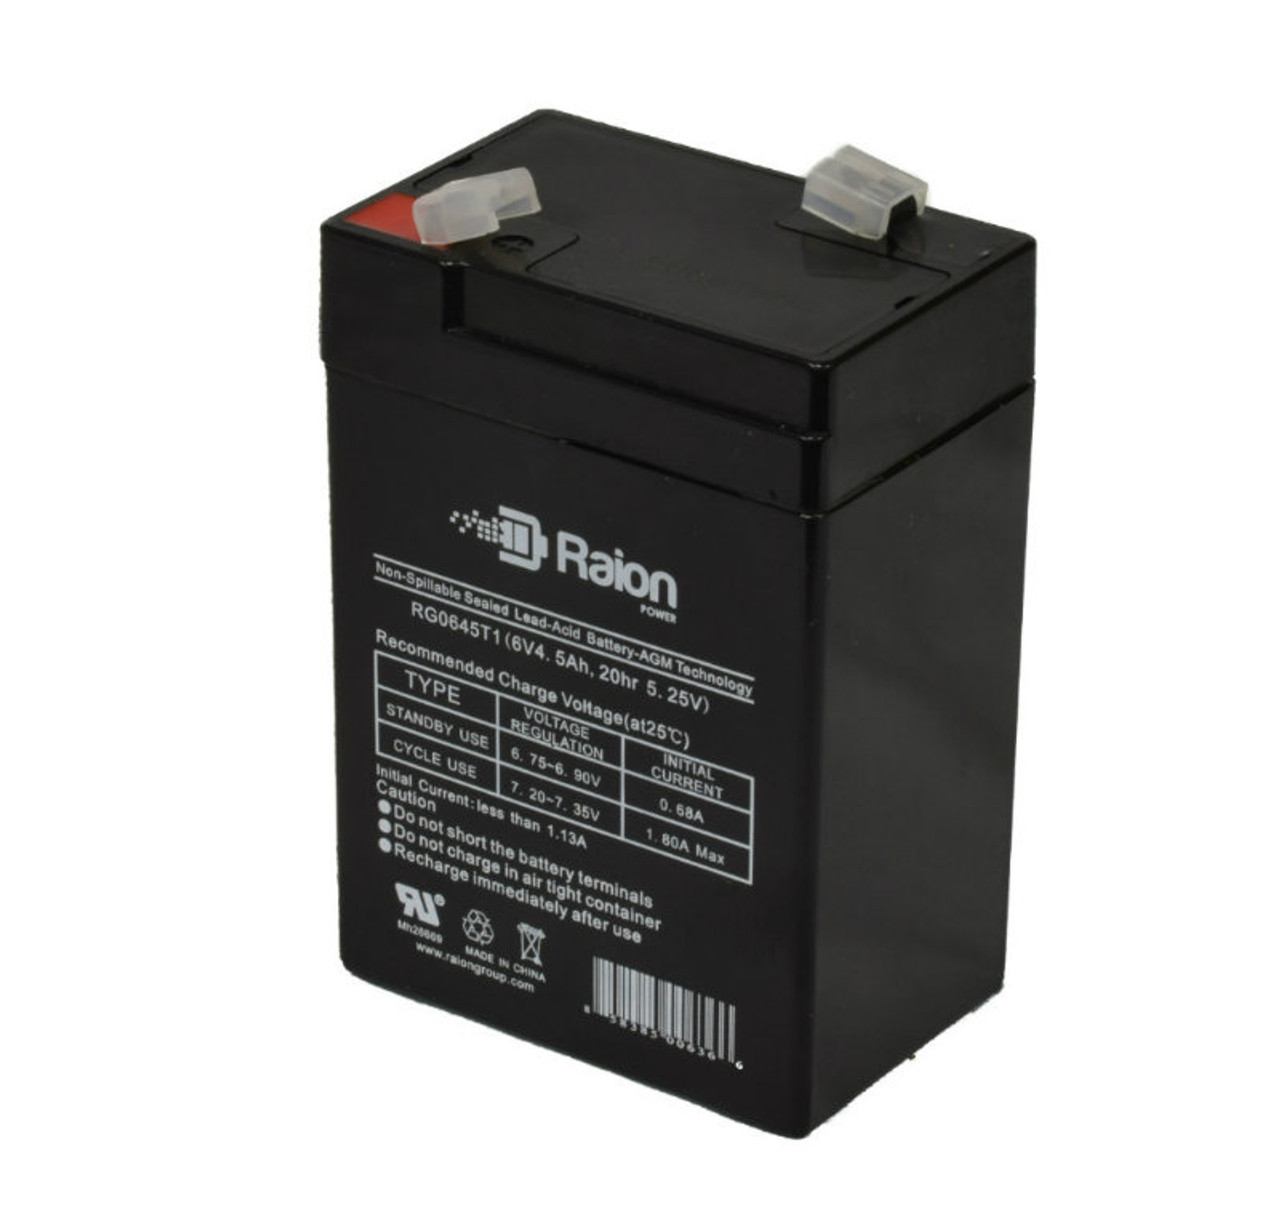 Raion Power RG0645T1 6V 4.5Ah Replacement Battery Cartridge for Sentry PM640